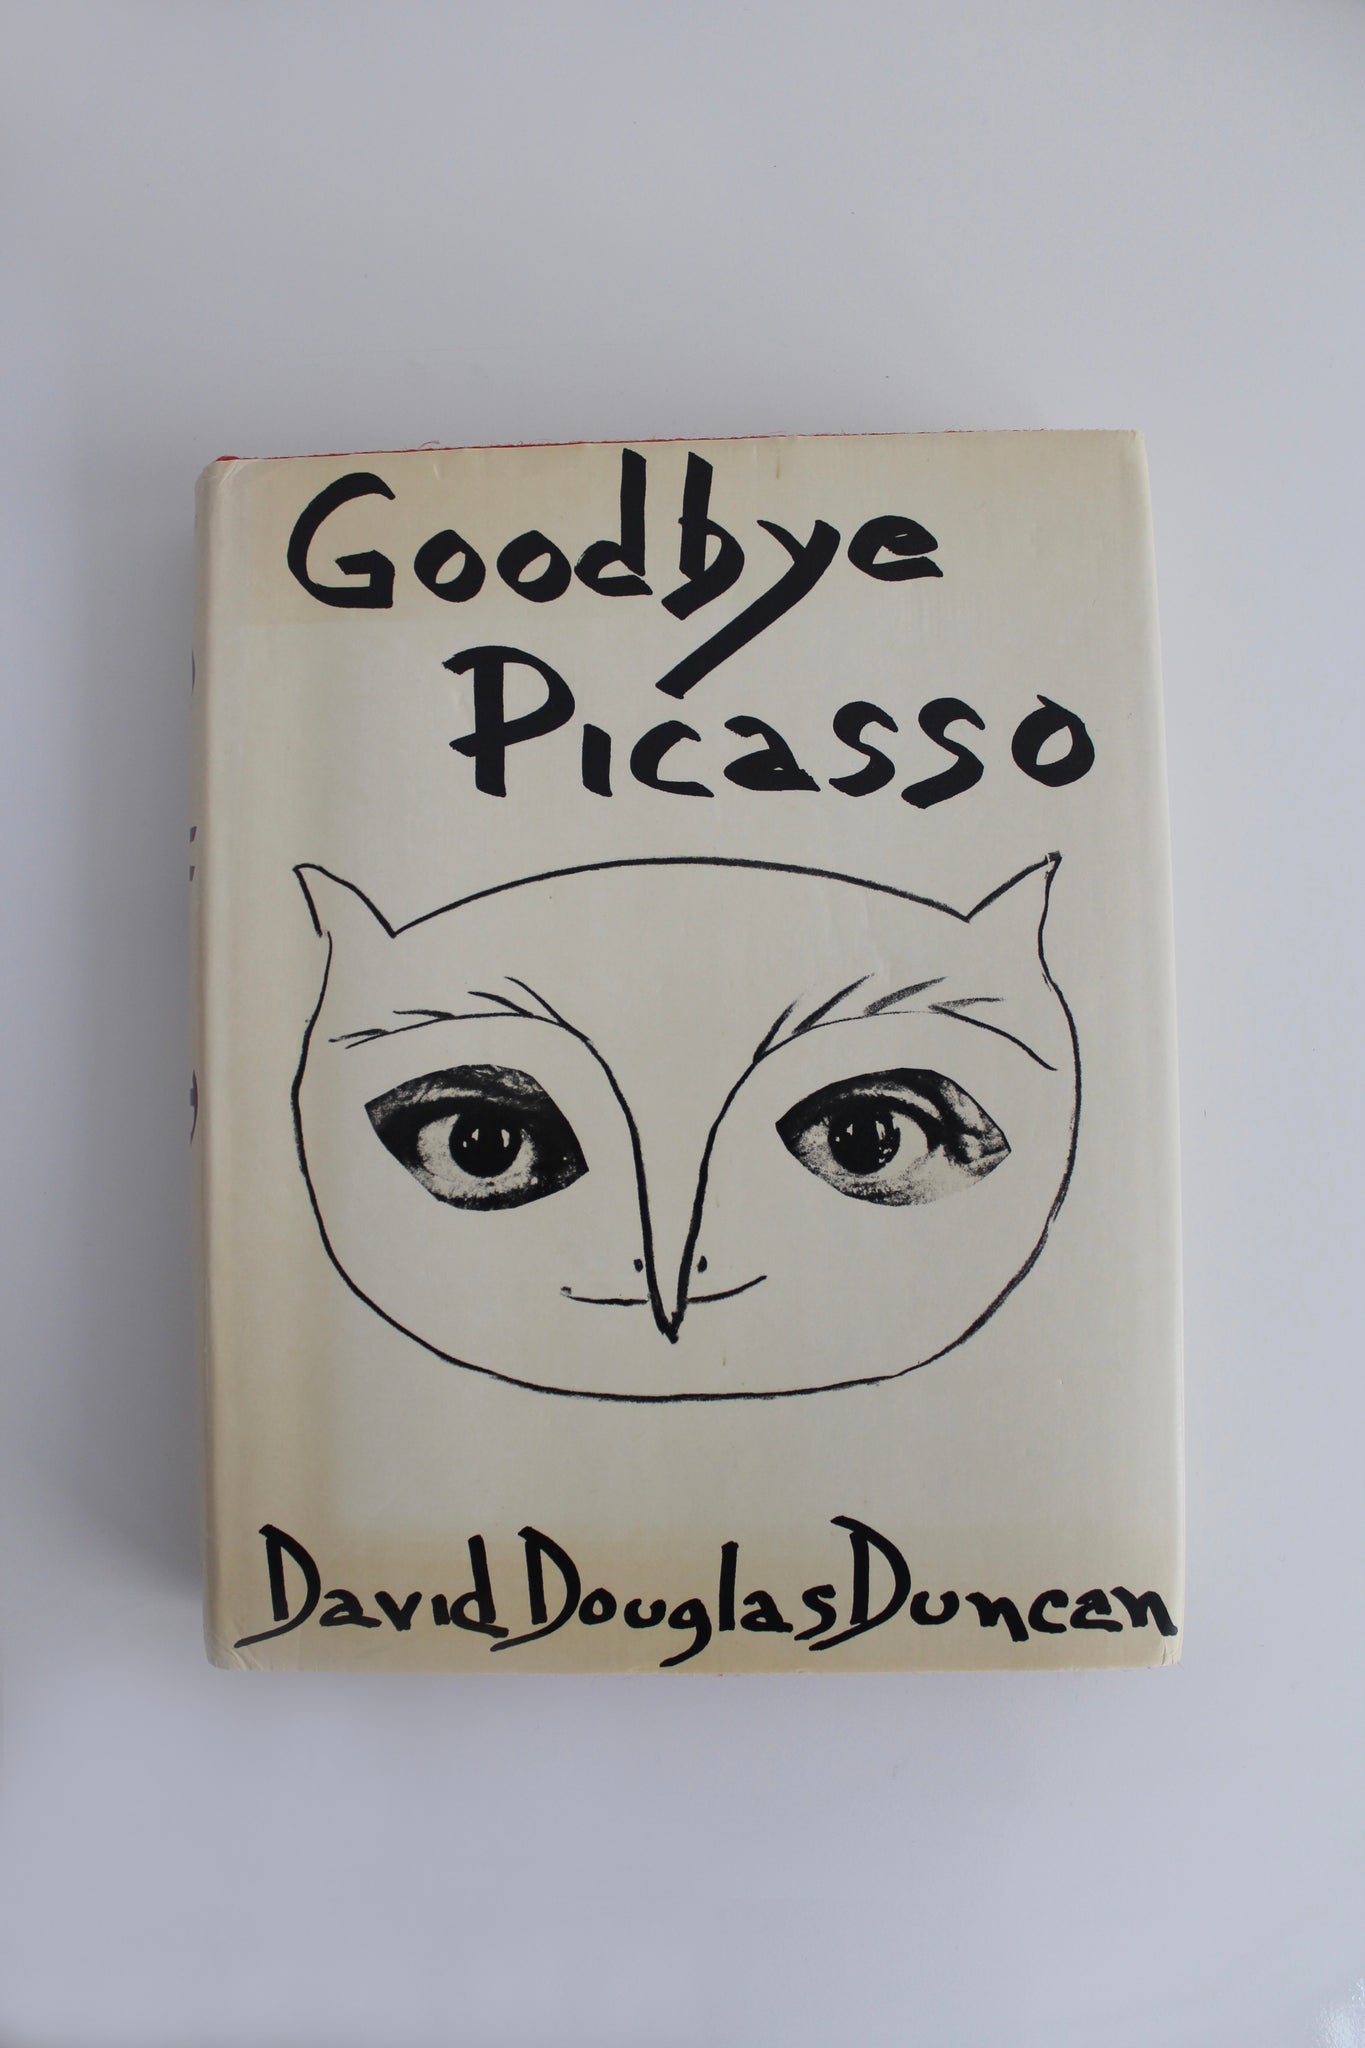 Goodbye Picasso by David Douglas Duncan